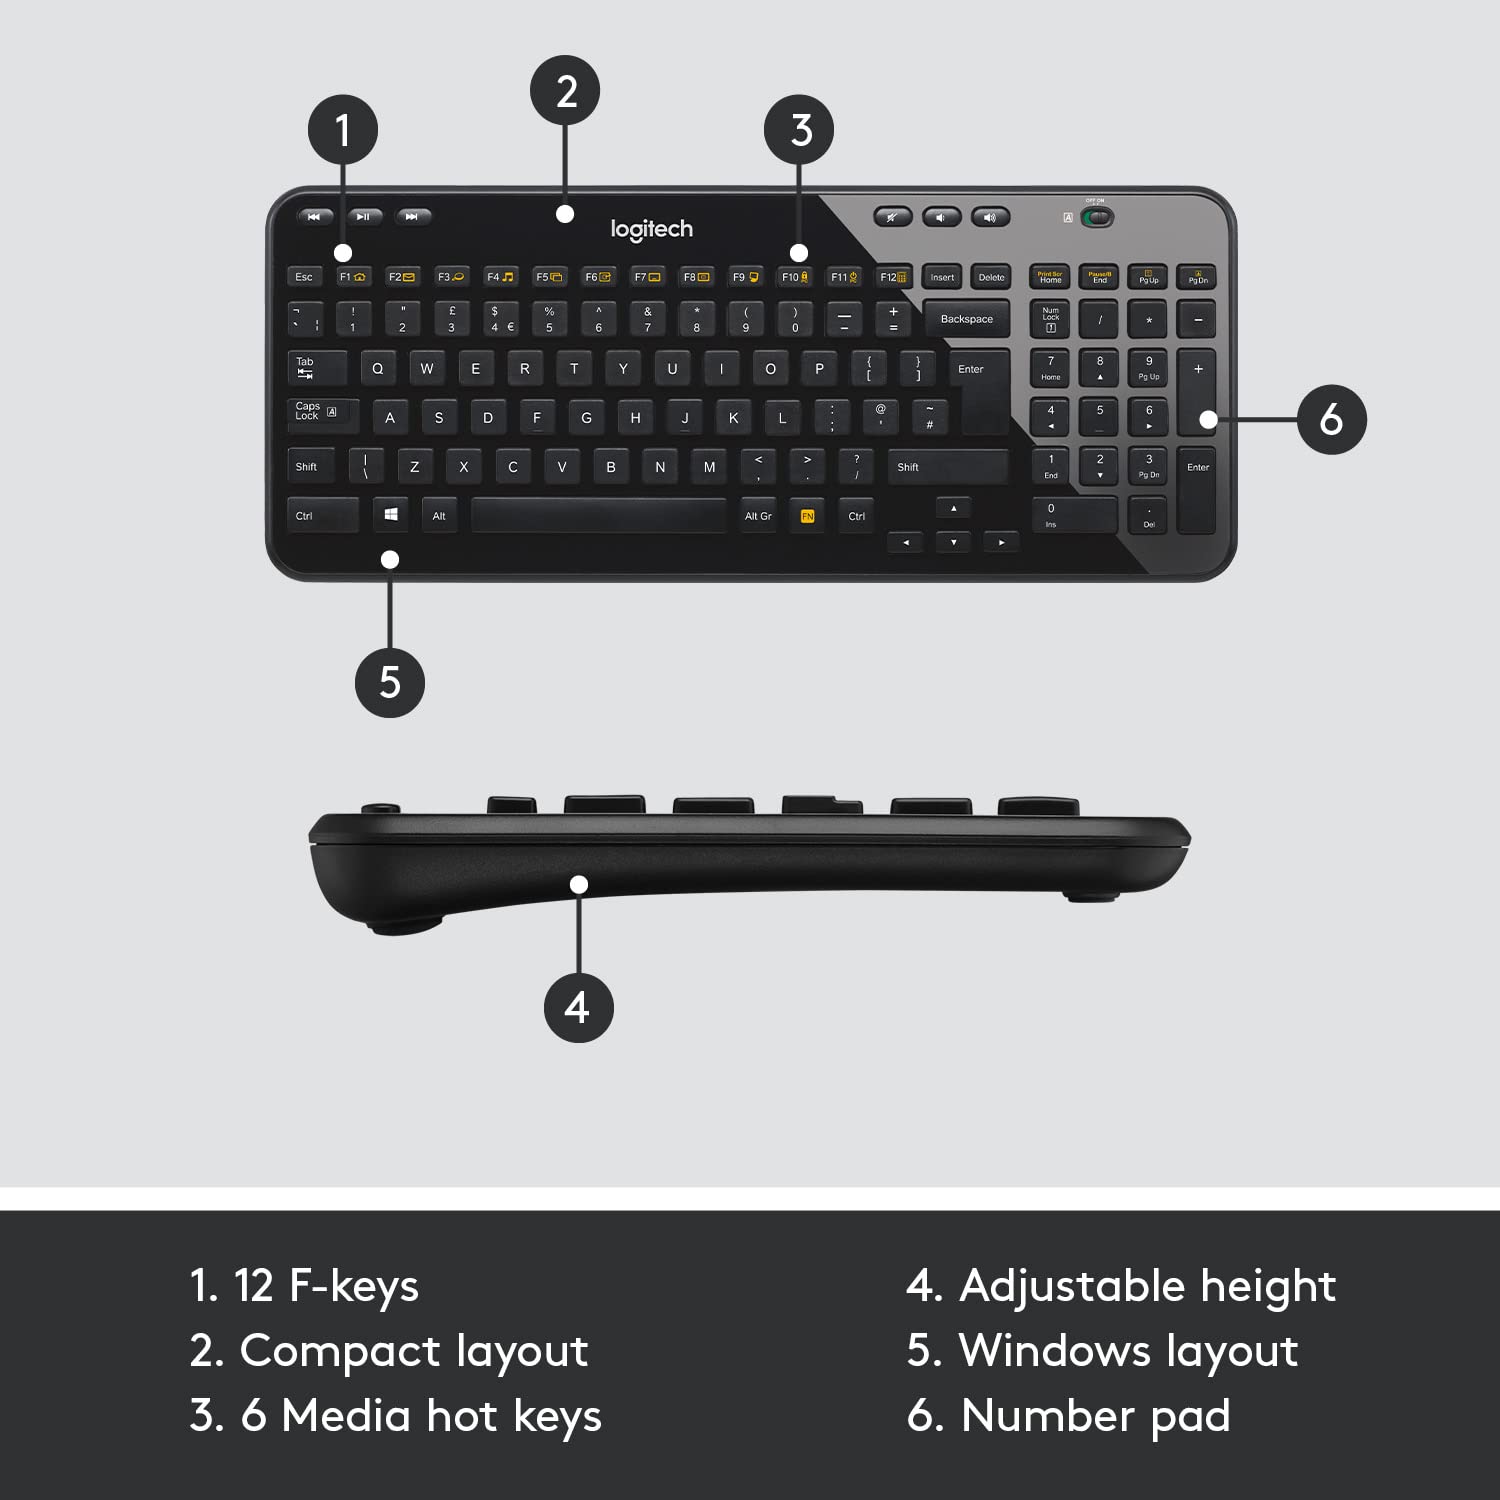 Logitech K360 Compact Wireless Keyboard for Windows, 2.4GHz Wireless, USB Unifying Receiver, 12 F-Keys, 3-Year Battery Life, Compatible with PC, Laptop, QWERTY UK English Layout - Black